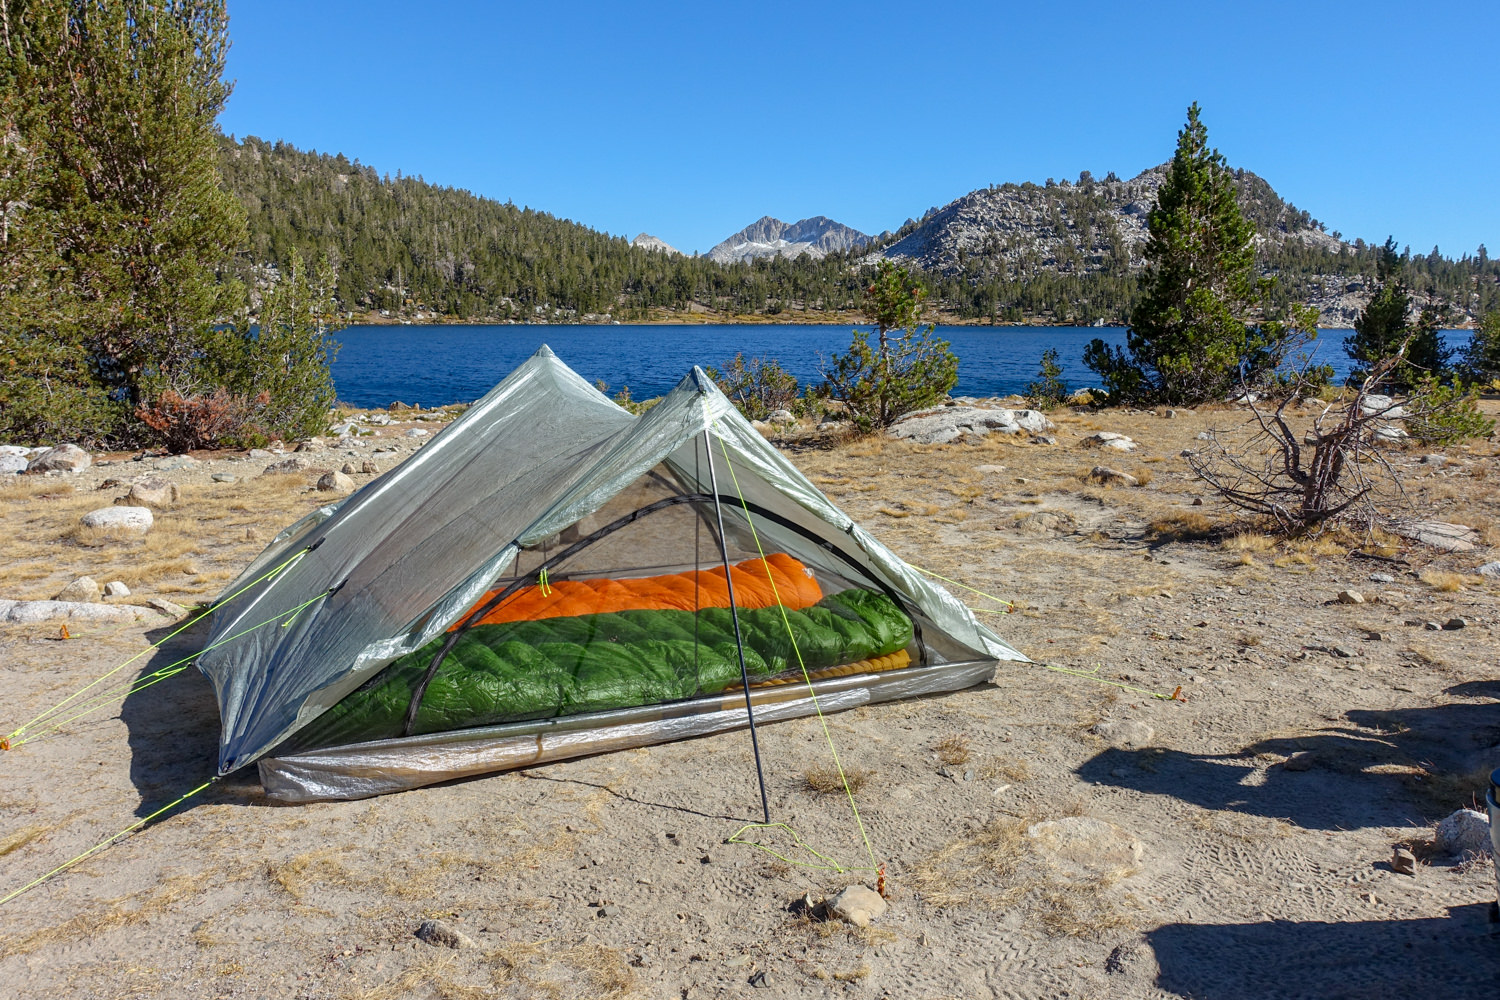 The WM Versalite and FF Egret UL 20 on a late-fall JMT trip